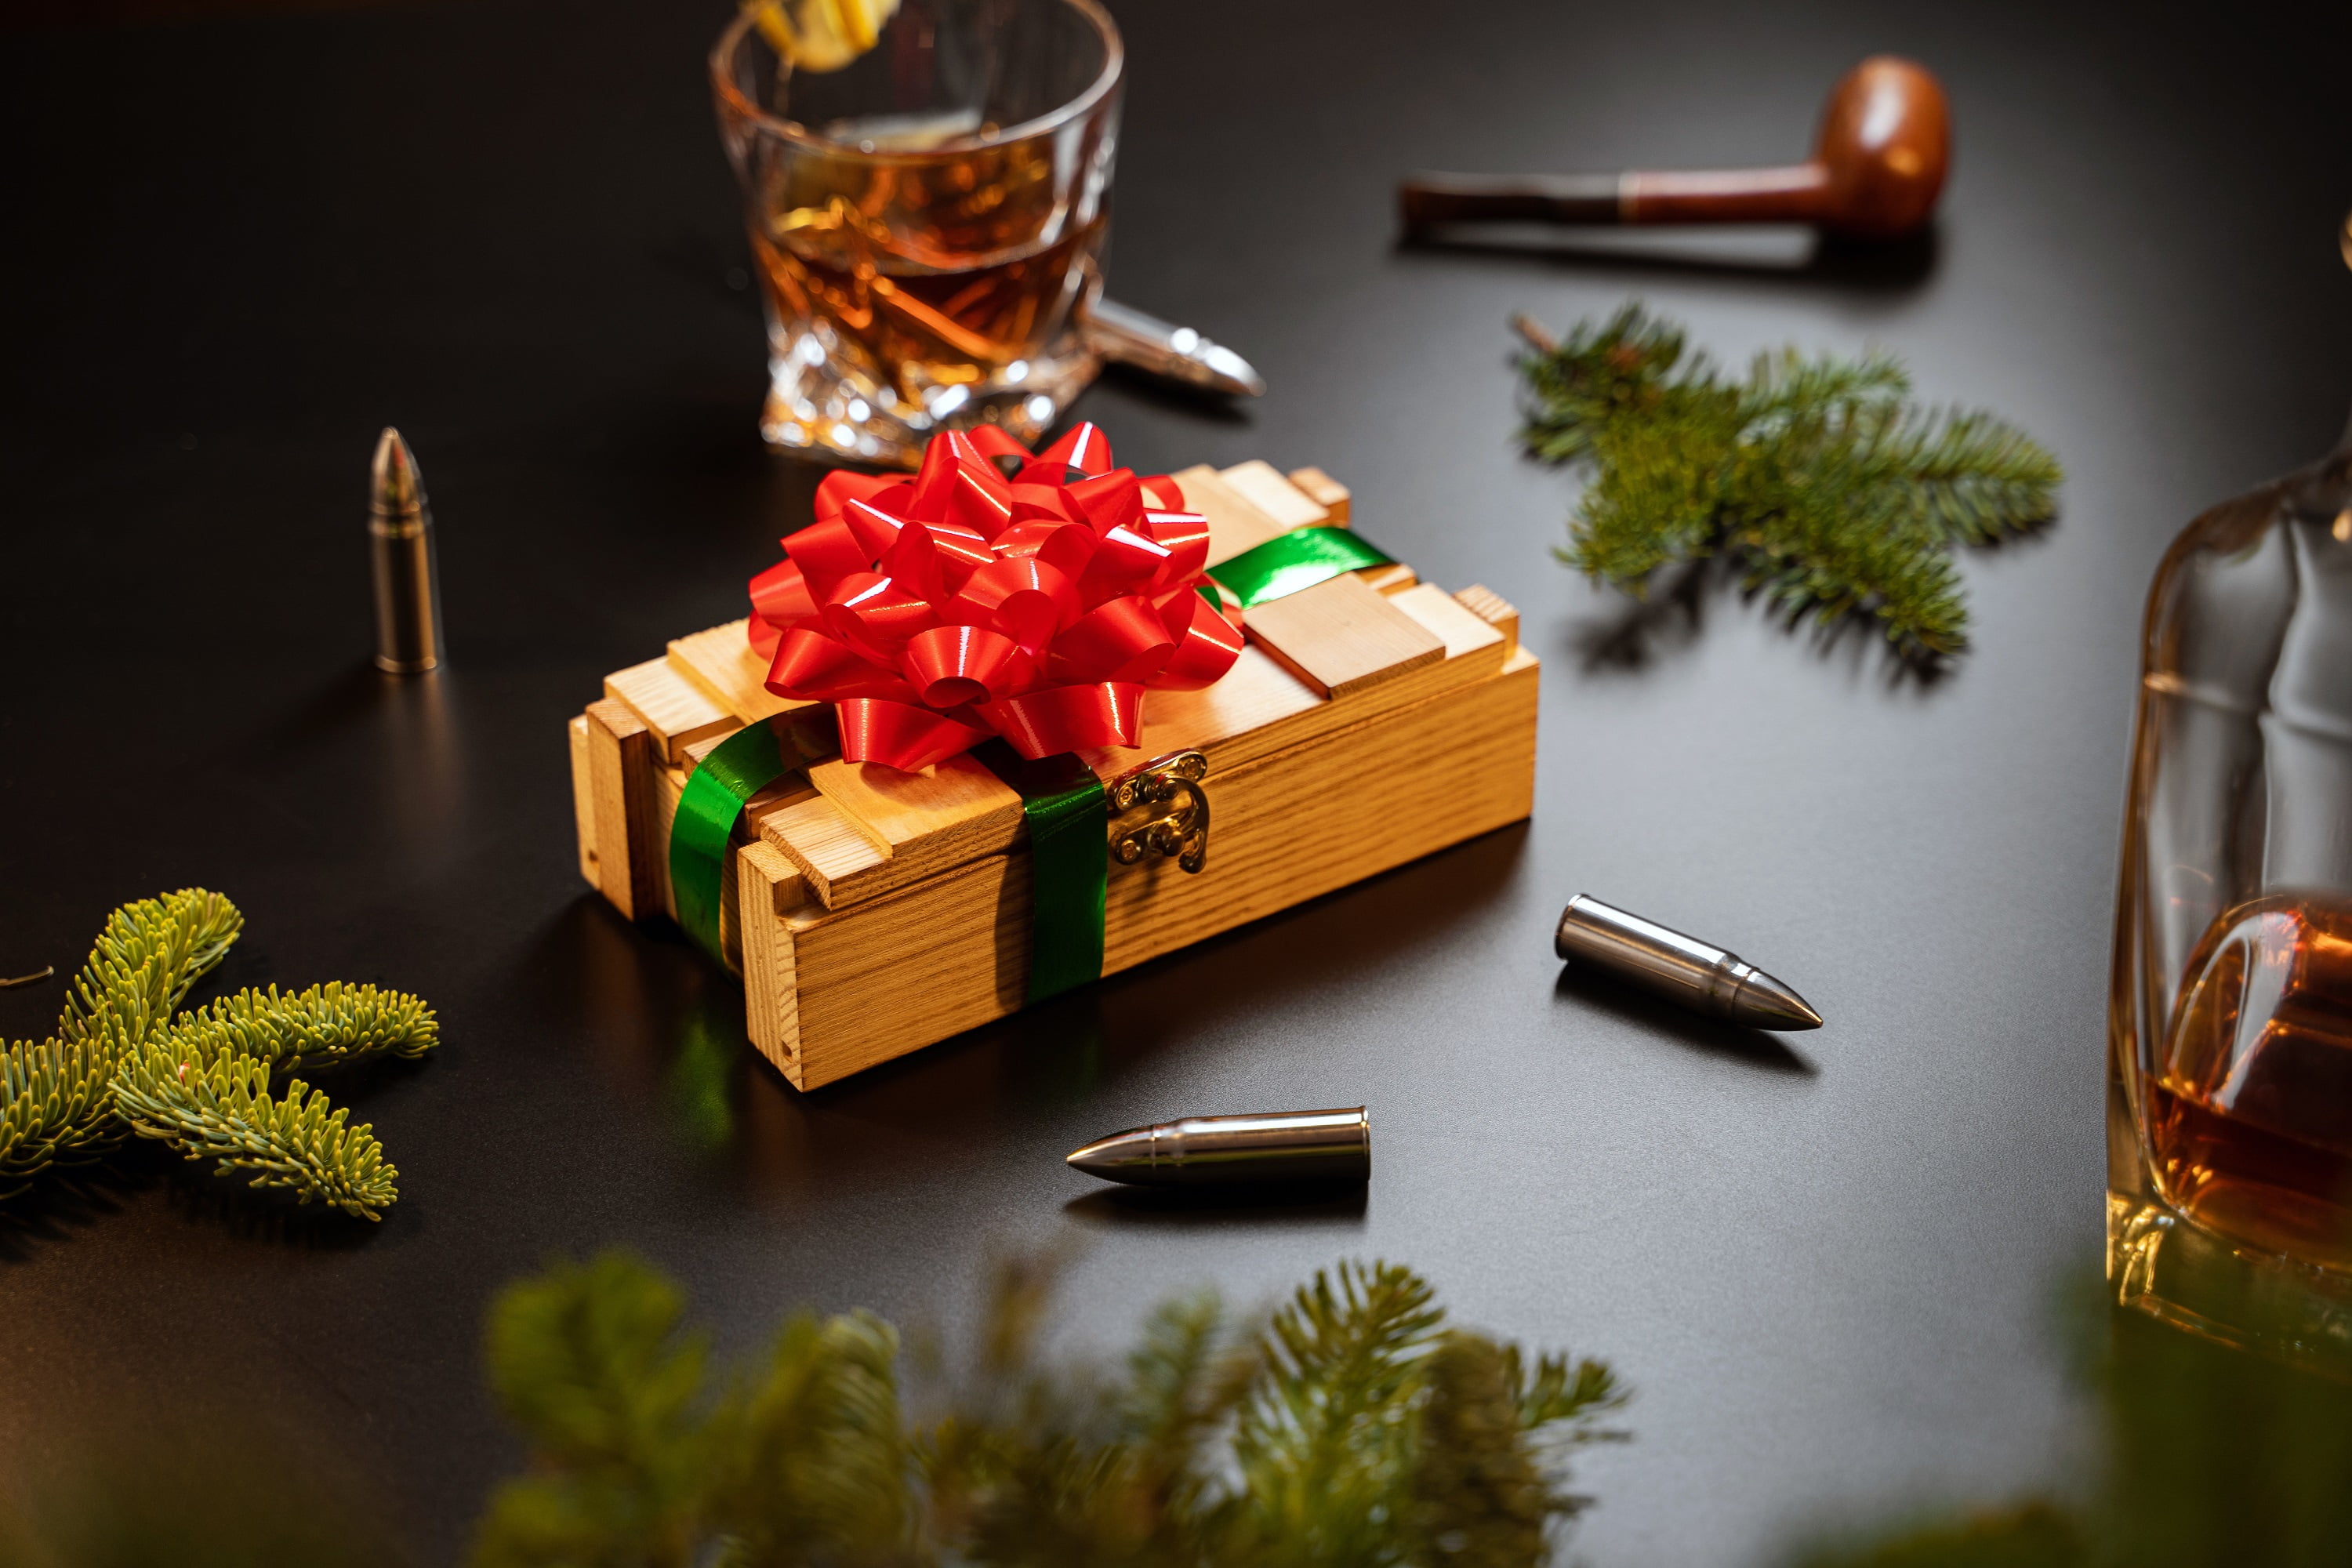 Whiskey Bullet Stones with Wooden Set Box, Stainless Steel Whisky Rock —  CHIMIYA